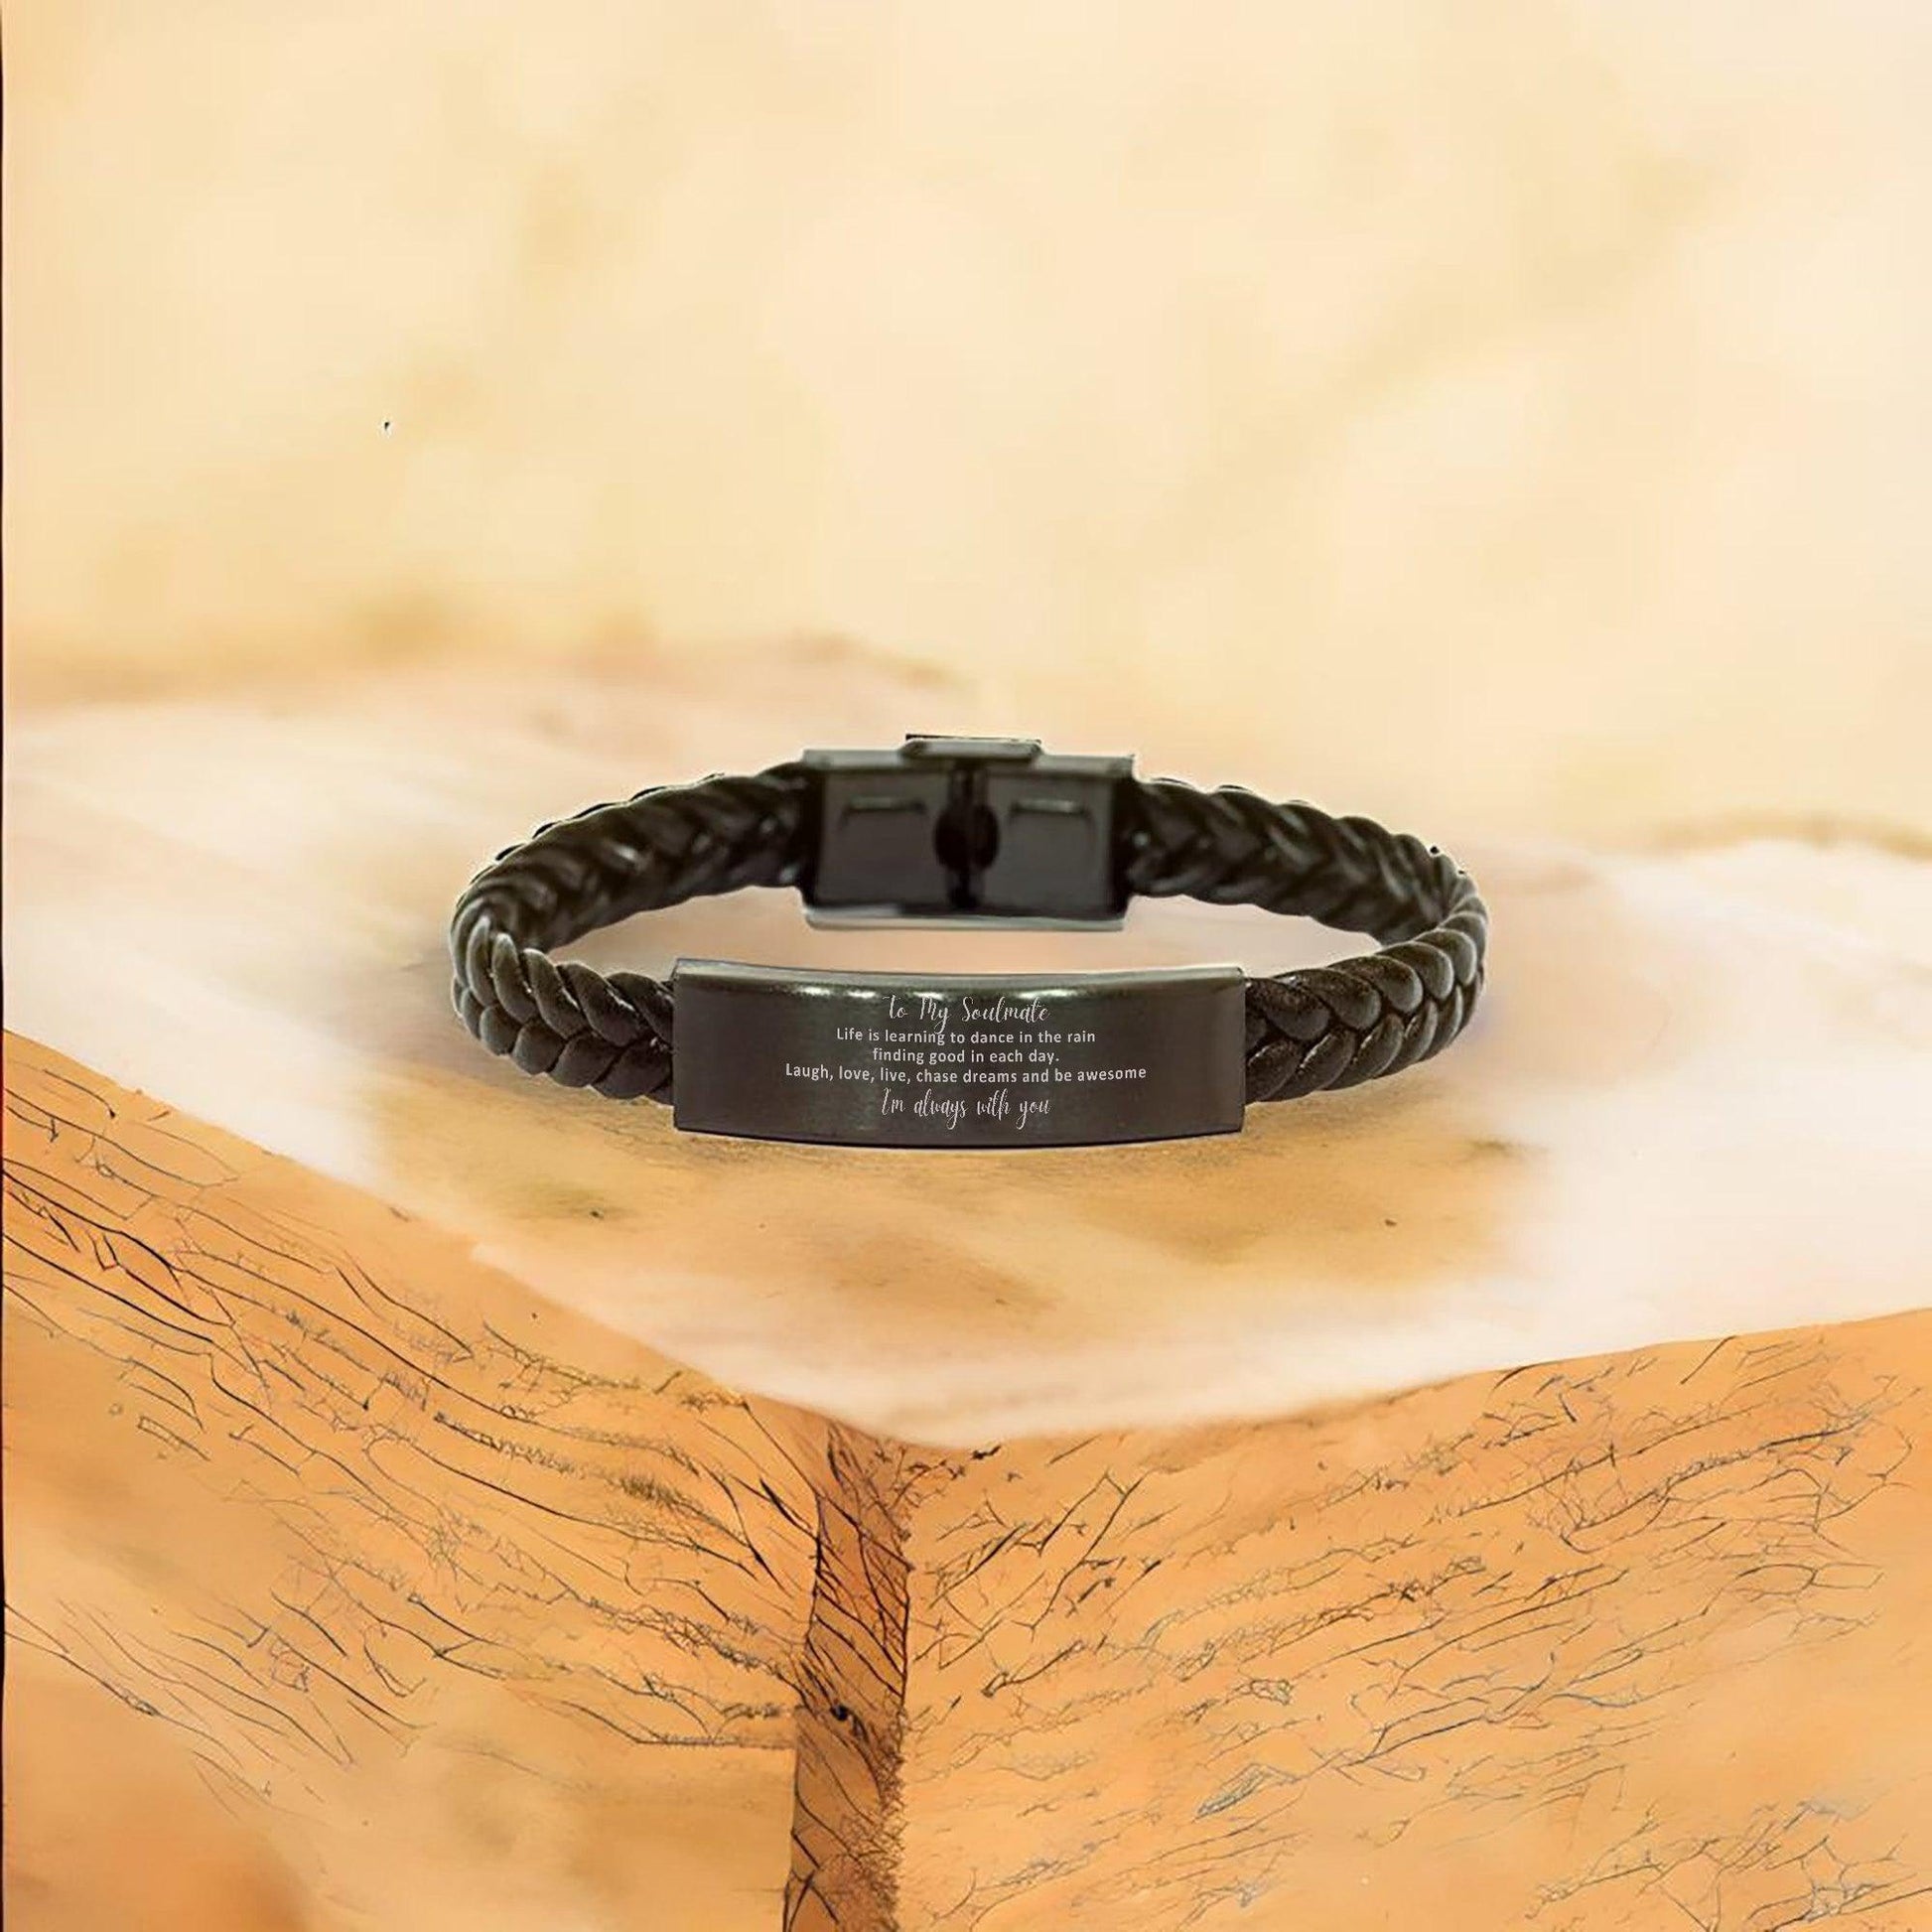 Heartfelt Soulmate Braided Leather Engraved Bracelet - Life is Learning to Dance in the Rain, I'm always with you - Birthday, Christmas Holiday Gifts - Mallard Moon Gift Shop